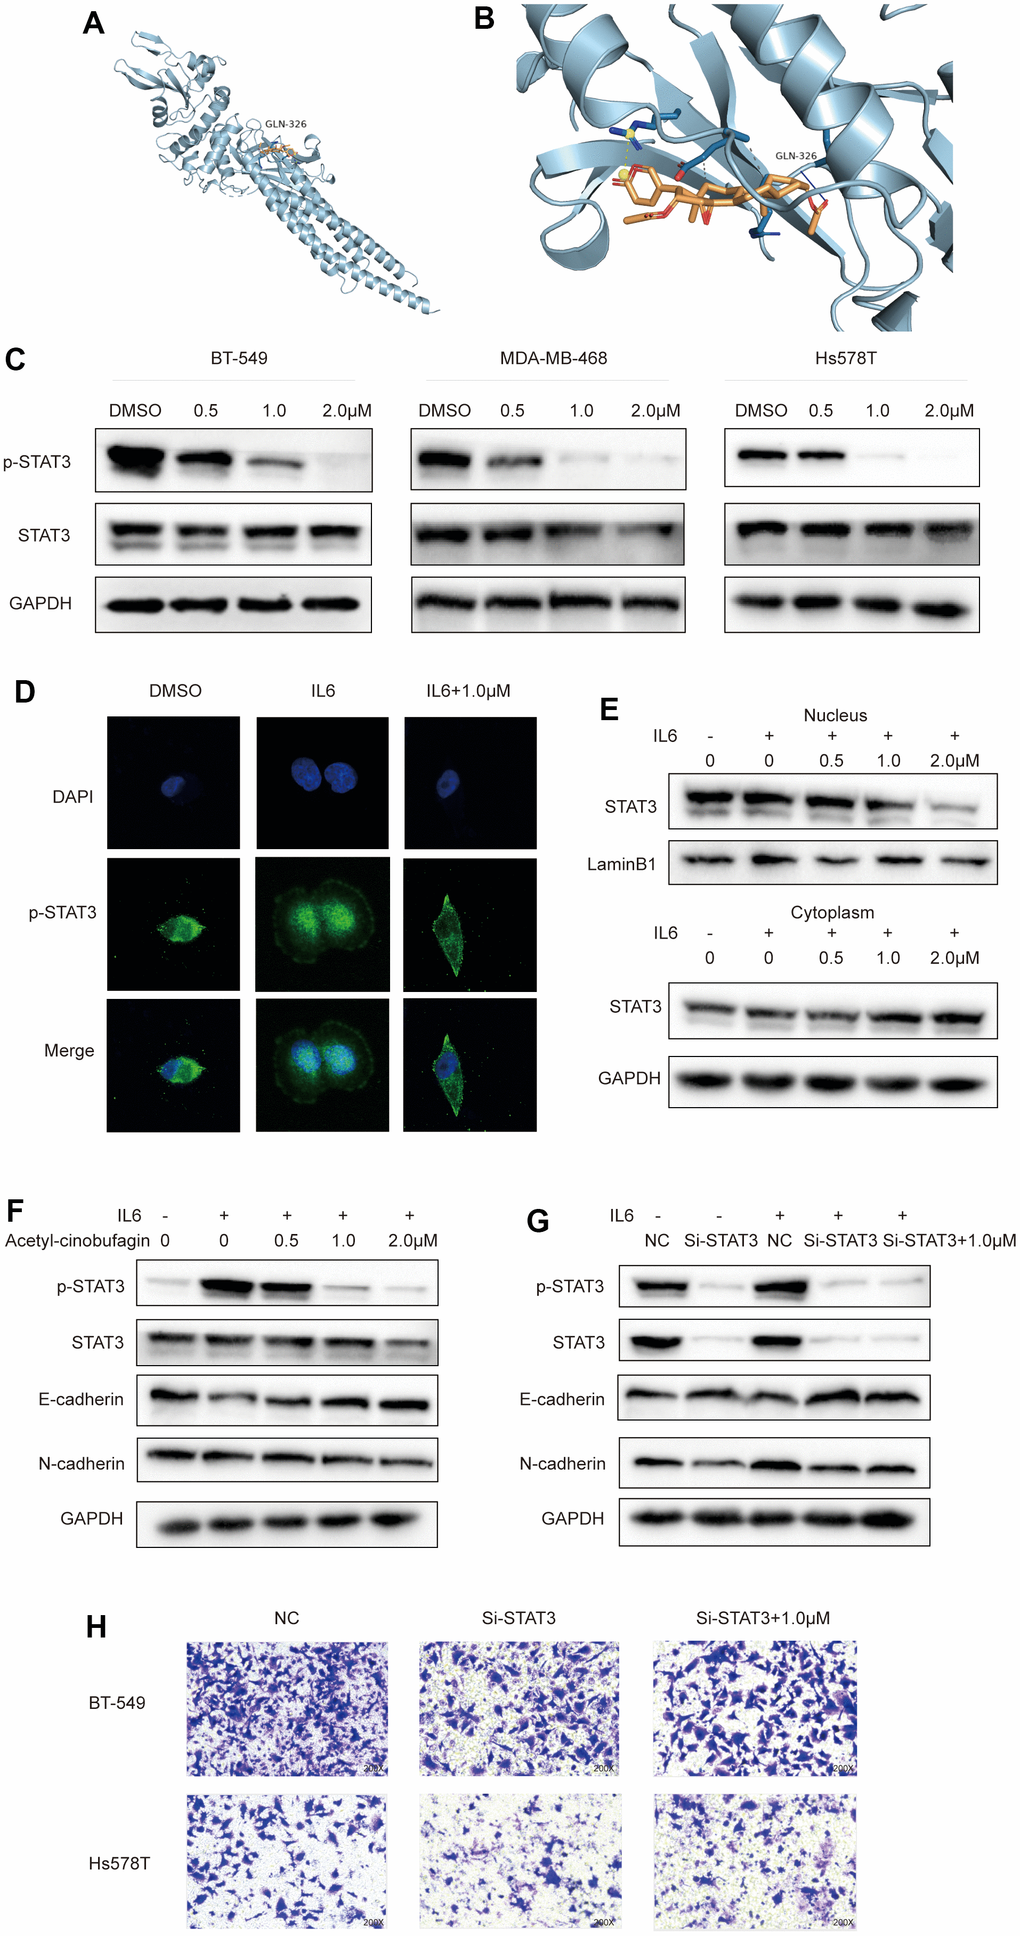 Acetyl-cinobufagin inhibits EMT through the STAT3 signaling pathway. (A, B) Molecular docking of acetyl-cinobufagin to the STAT3 binding sites. (C) Expression of proteins involved in the STAT3 signaling pathway as detected by Western blot analysis. (D) The subcellar location of STAT3 was examined by immunofluorescence staining and confocal laser scanning microscopy (CLSM) in BT-549 cells. (E) The levels of STAT3 protein in the cytoplasm and nuclei were determined by immunoblotting analysis after extraction from BT-549 cells. (F) BT-549 cells treated with IL6 for 30 min after treatment with acetyl-cinobufagin for 10-20 h; expression levels of proteins associated with STAT3 and EMT signaling pathways as detected by Western blot analysis. (G) STAT3 knockdown in BT-549 cells treated with control, IL6 or IL6 + acetyl-cinobufagin (1.0 μM), expression levels of proteins related to STAT3 and EMT signaling pathways as detected by Western blot analysis. (H) Evaluation of metastatic abilities of BT-549 and Hs578T after knockdown of STAT3.